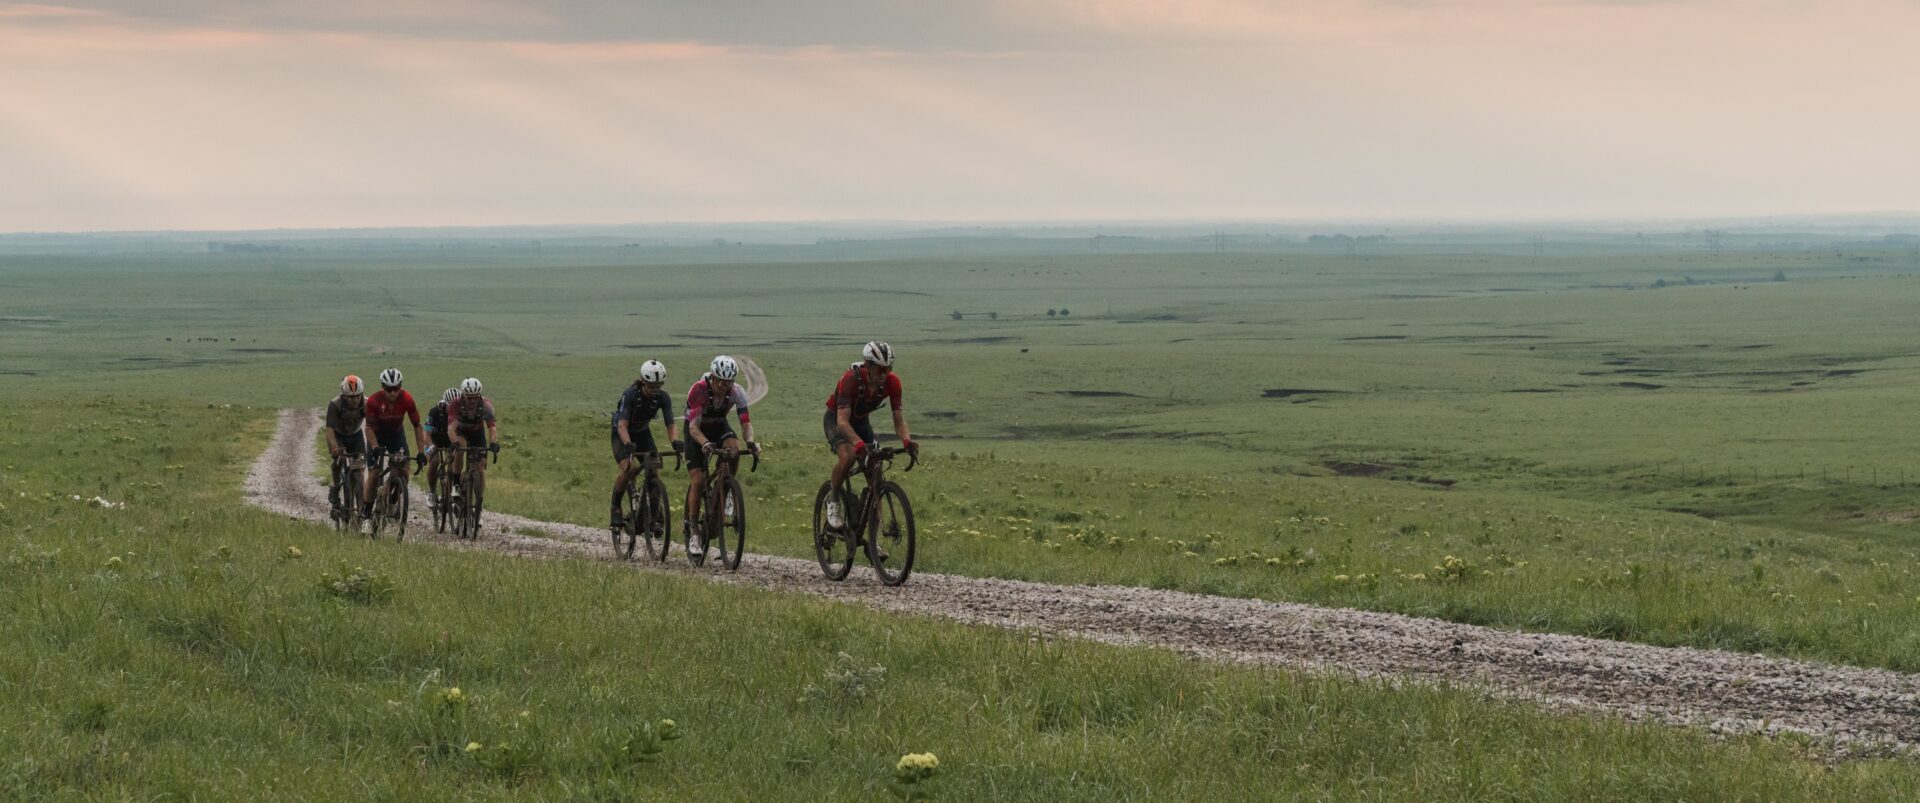 Pack of riders in the Kansas hills 2